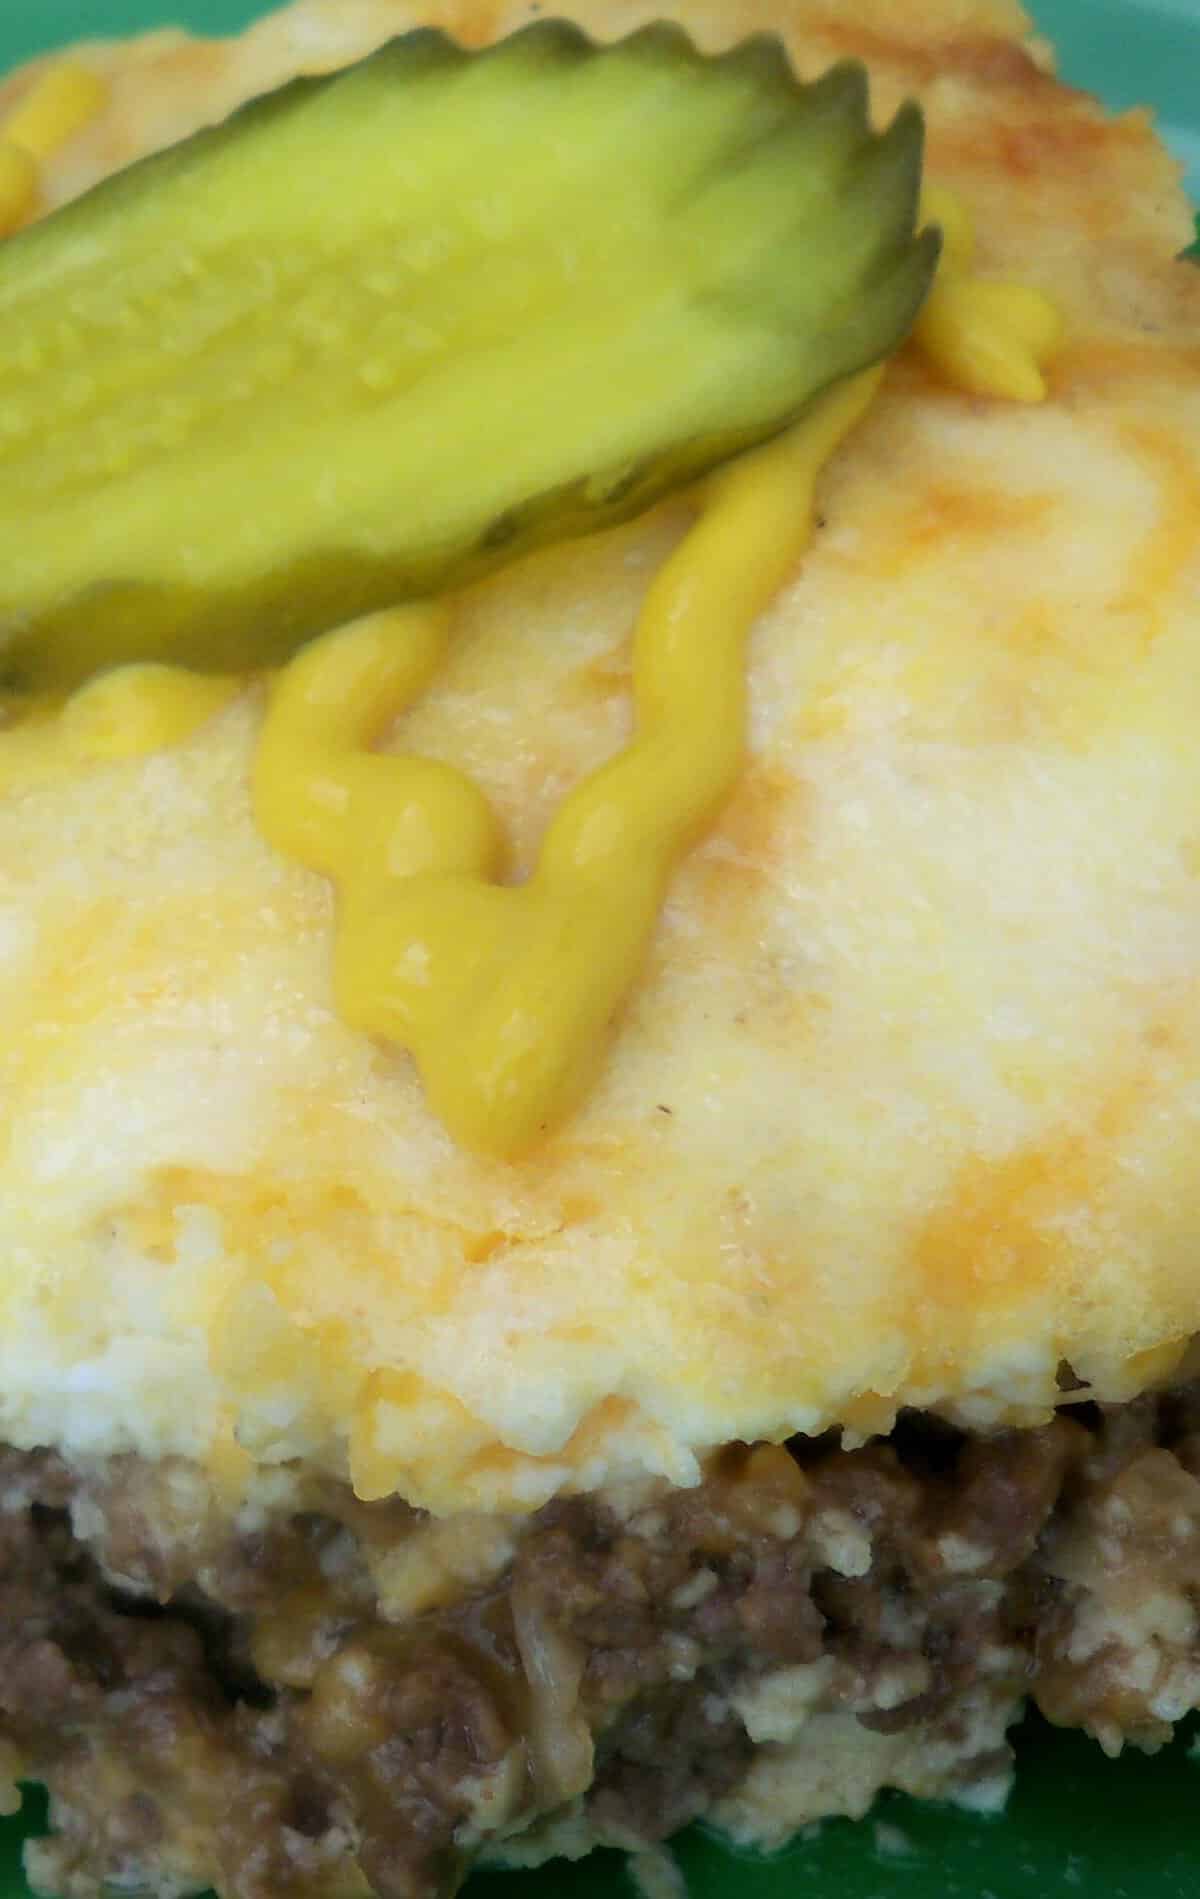  A low carb twist on a classic, this casserole will satisfy your cravings without the carbs.